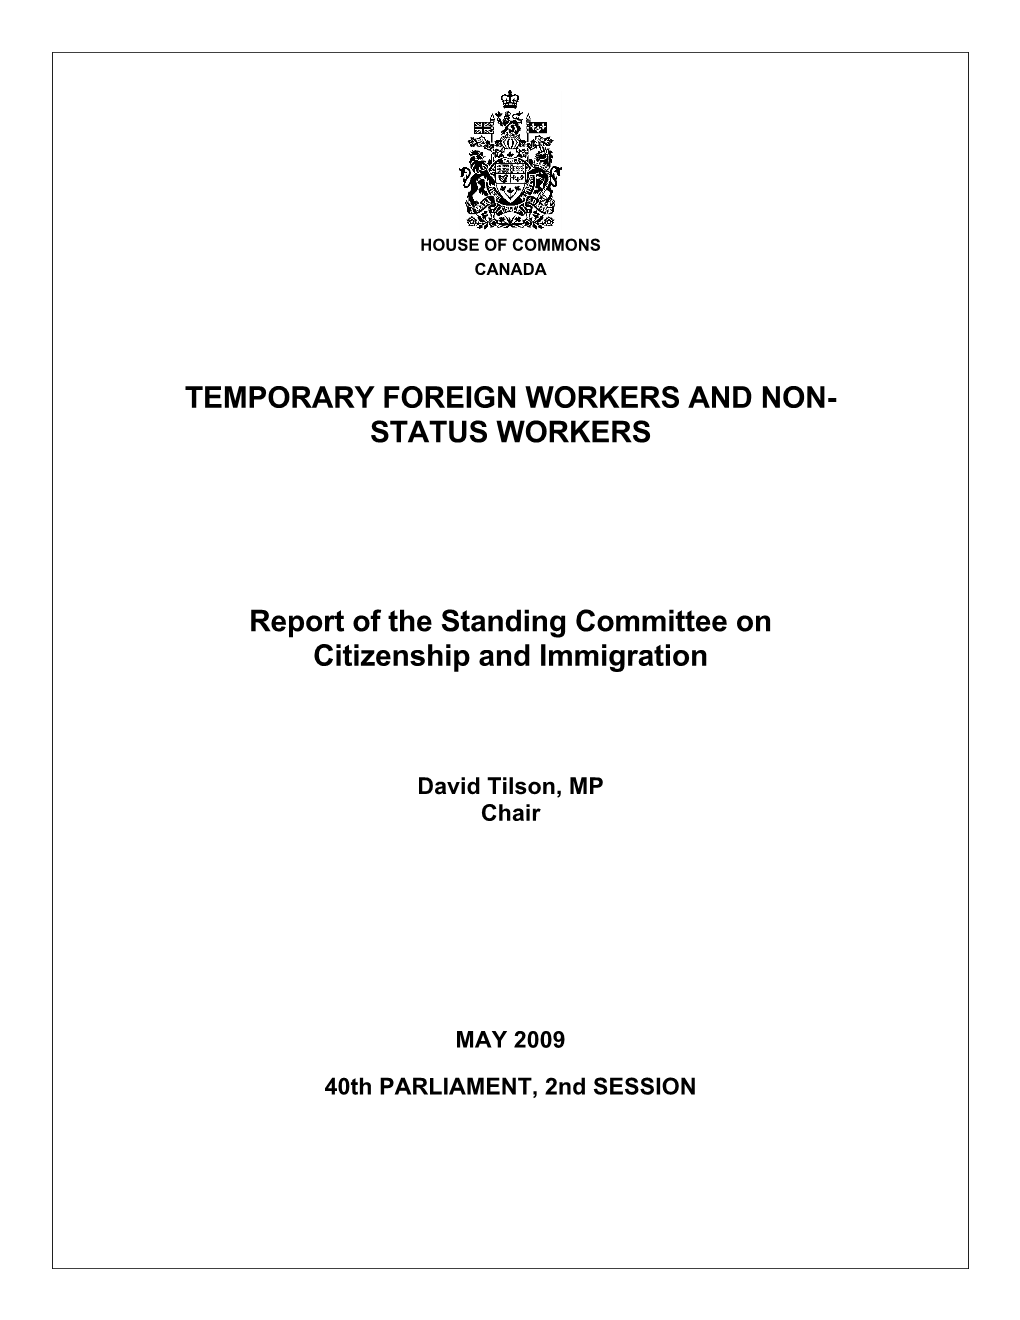 TEMP FOREIGN WORKERS NONSTATUS WORKERS Report